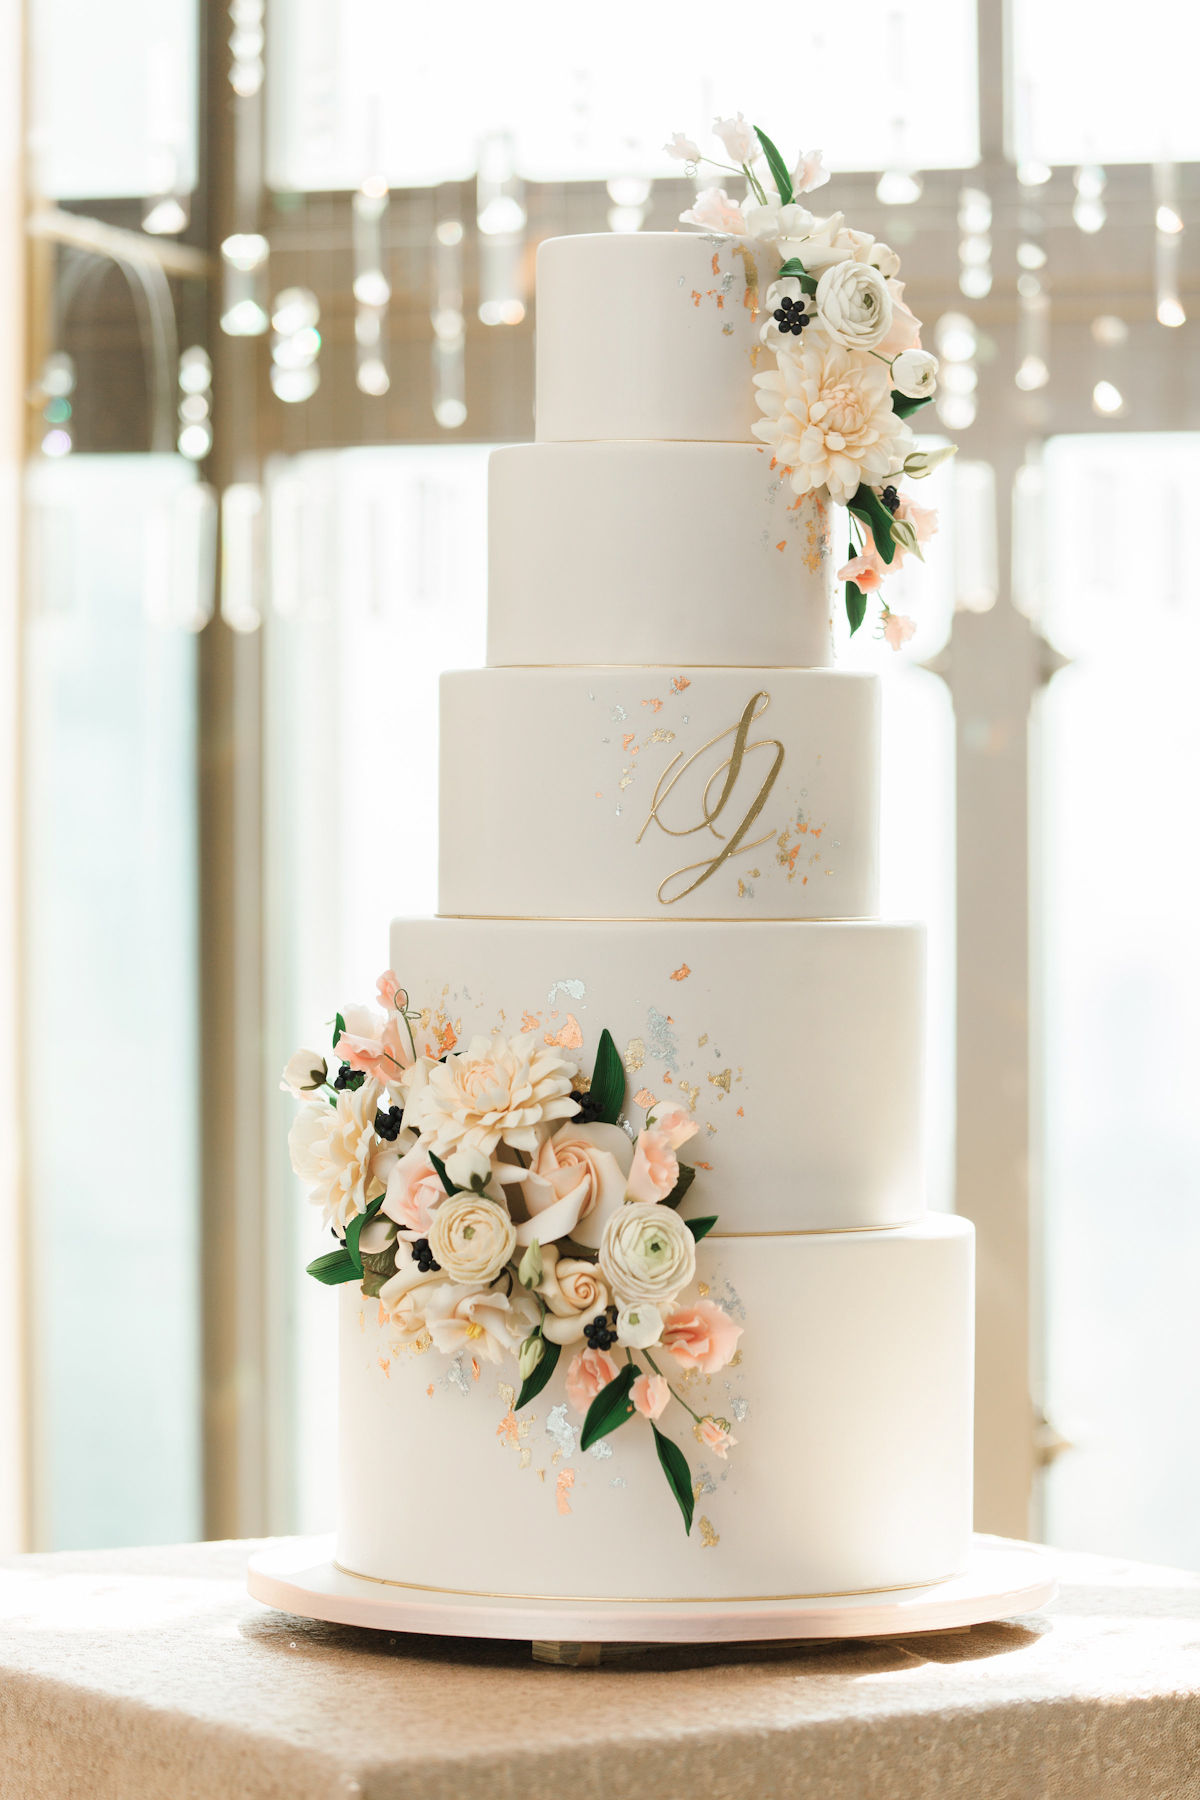 Wedding cake with flowers and metallic accents at Rainbow Room wedding